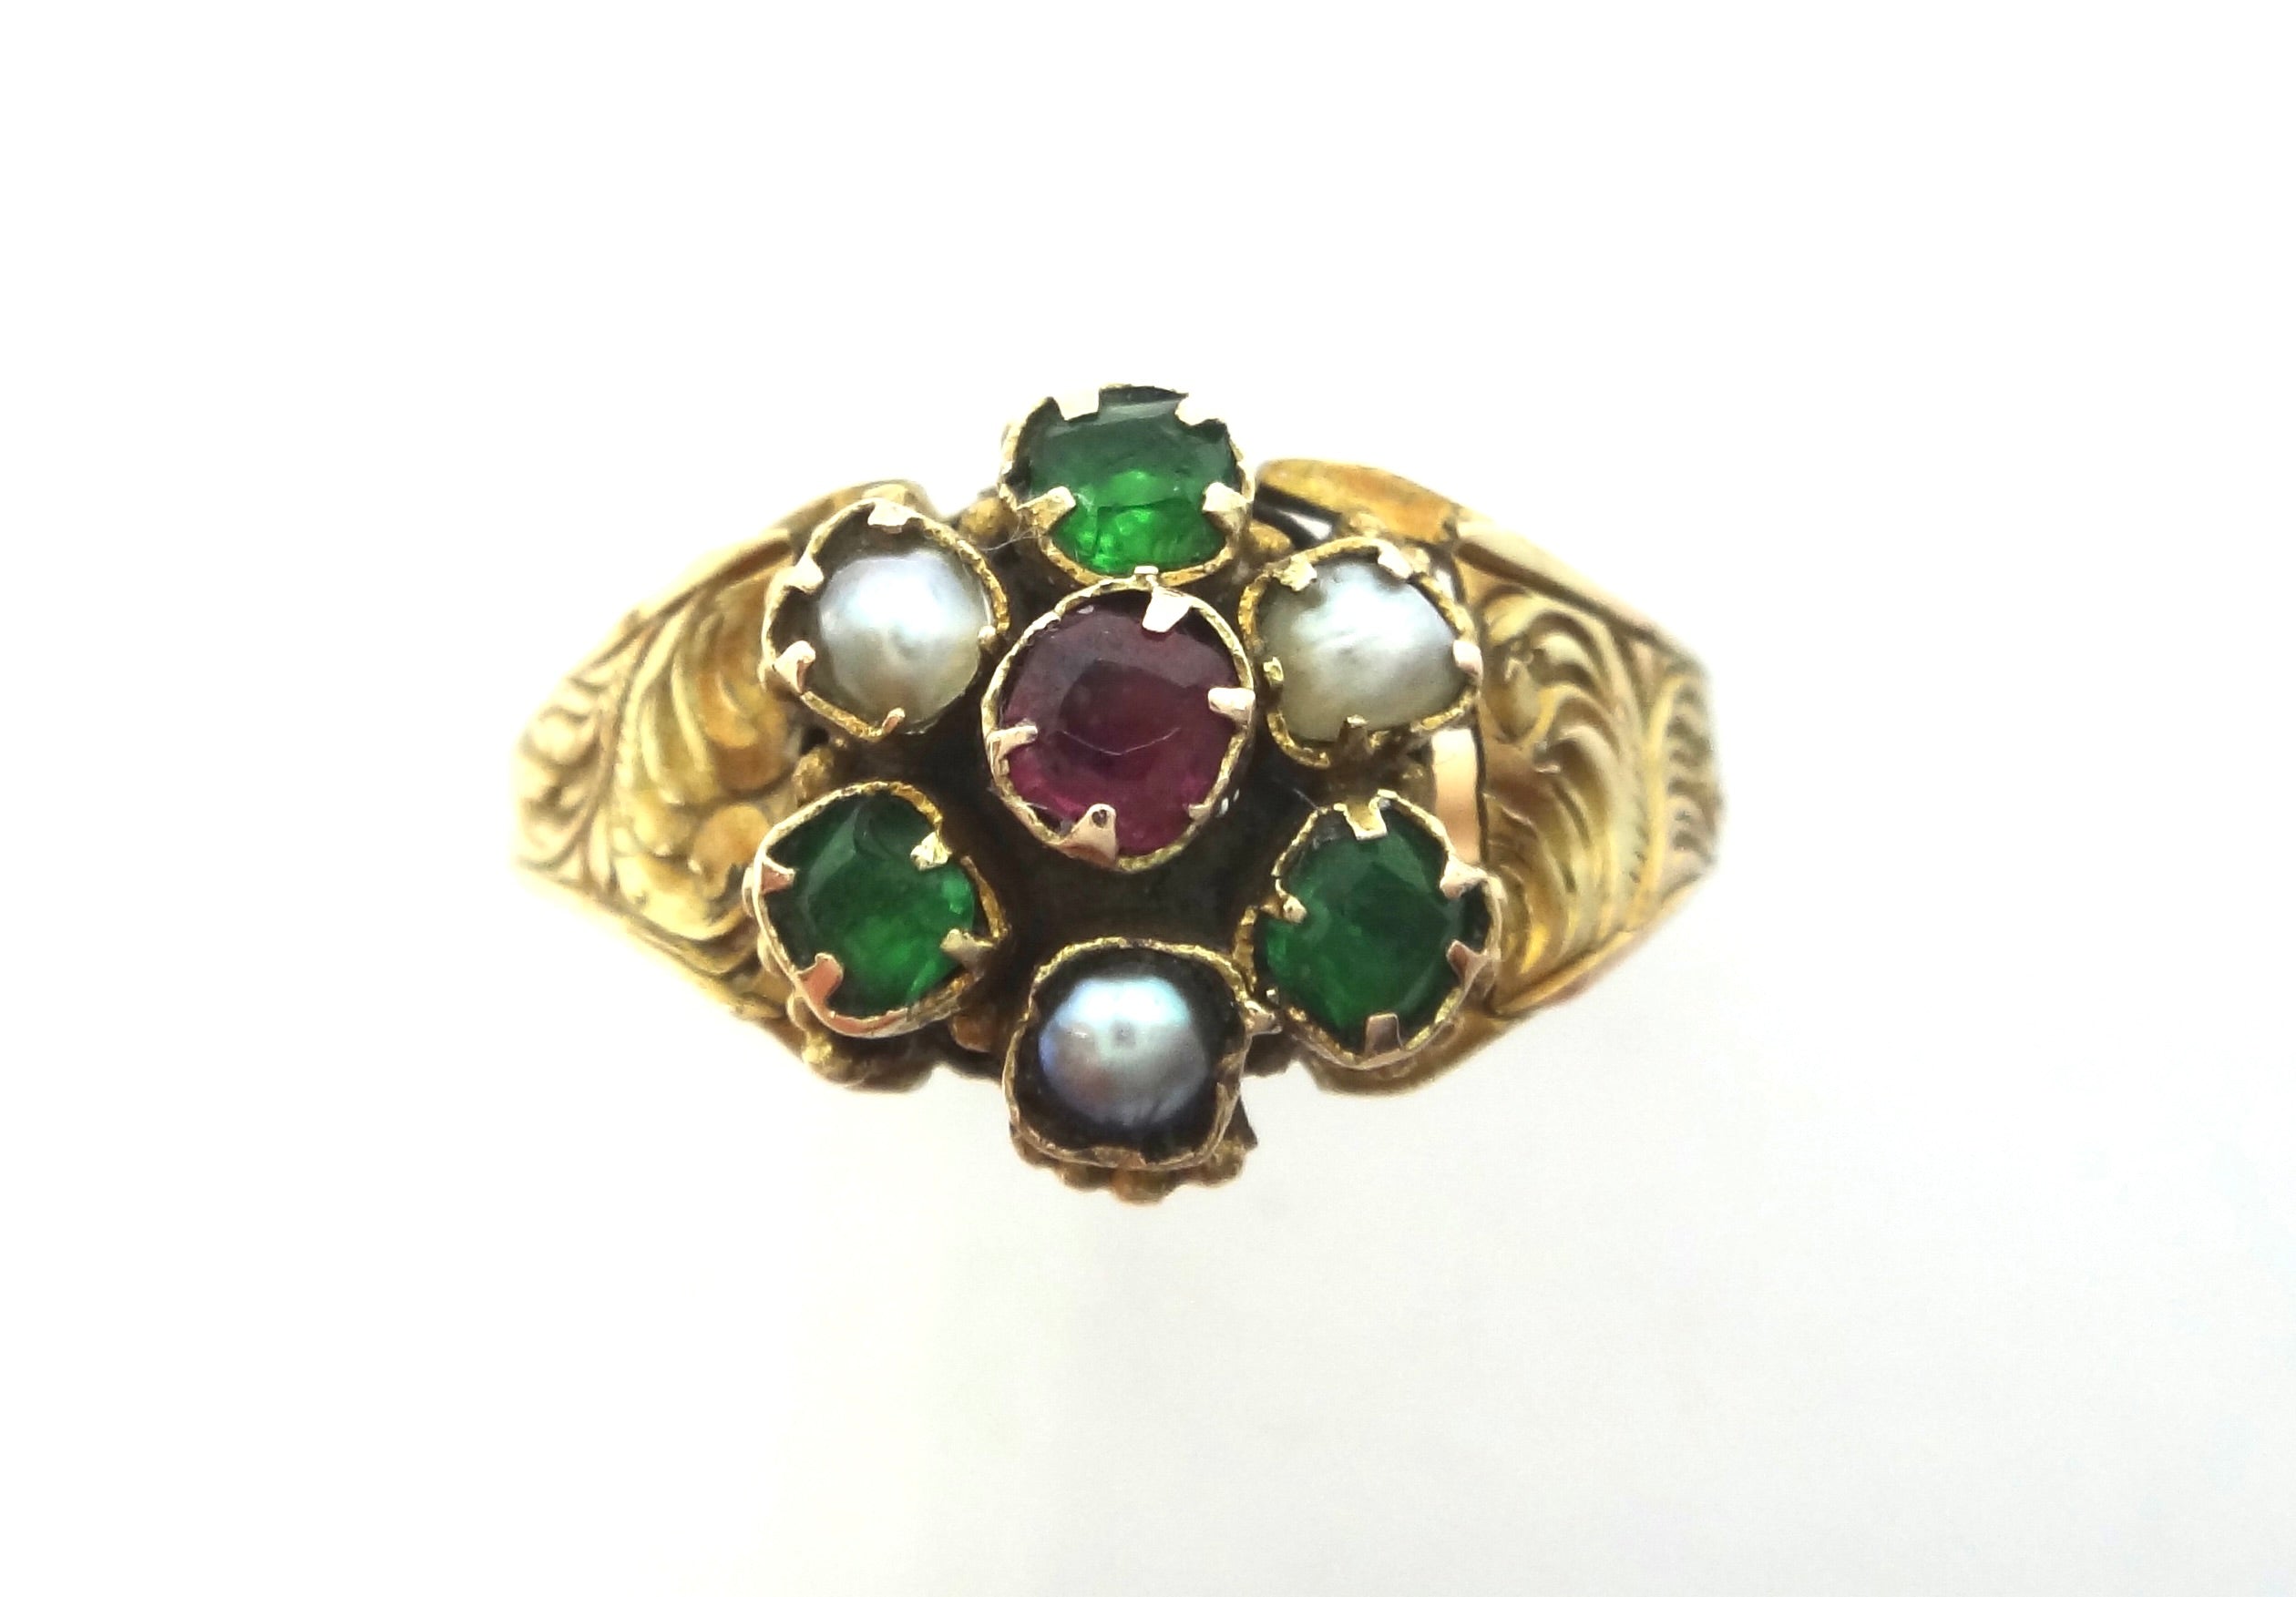 ANTIQUE 18ct Yellow GOLD, Pearl & Tourmaline Ring c.1870